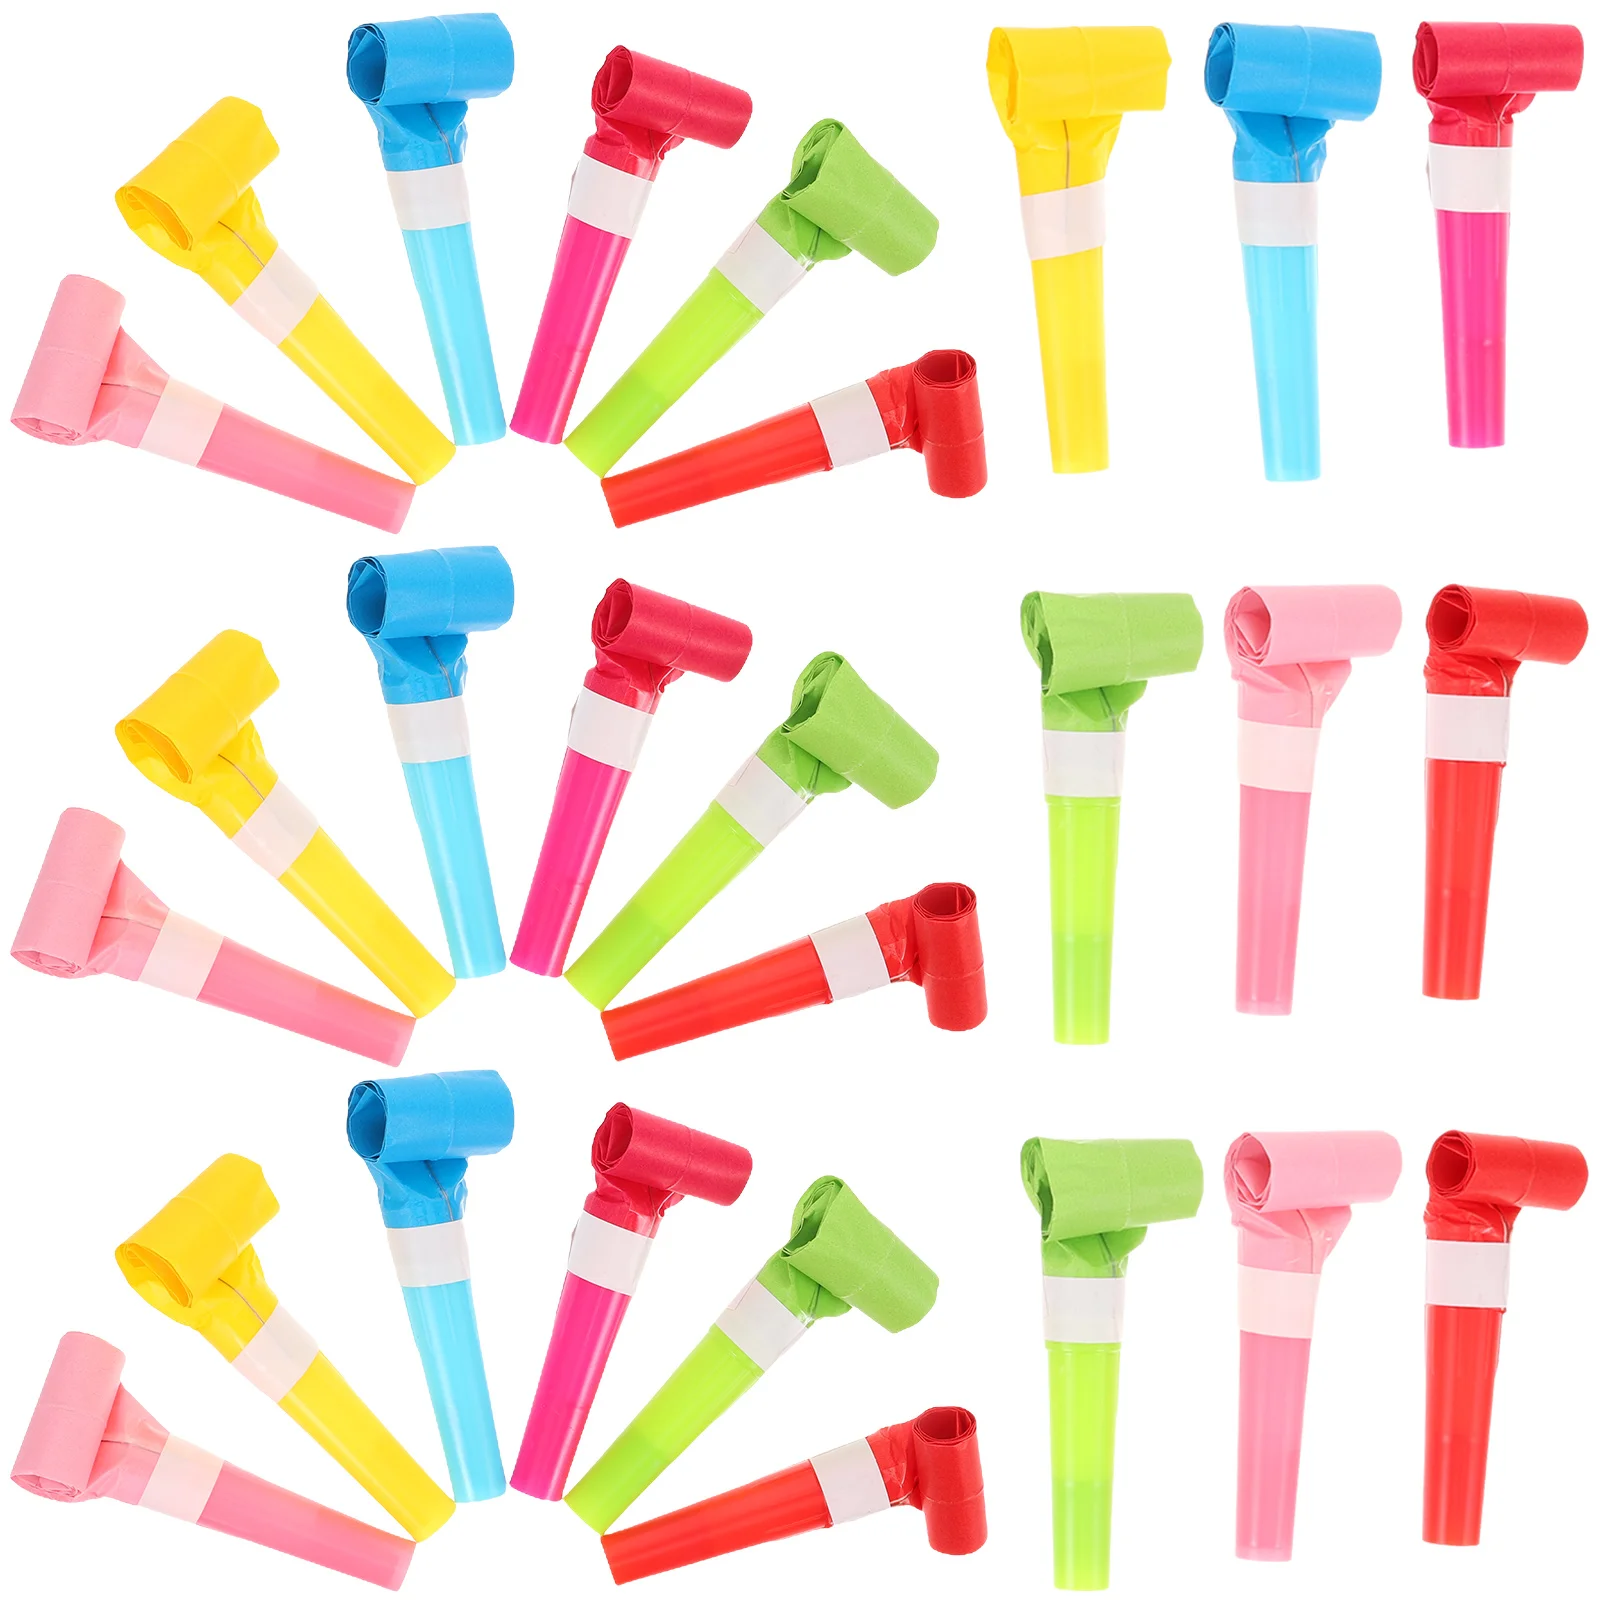 

60pcs 6cm Solid Color Whistles Plastic Noise Makers Cheering Props Party Playing Whistle for Kids Children (Random Color)